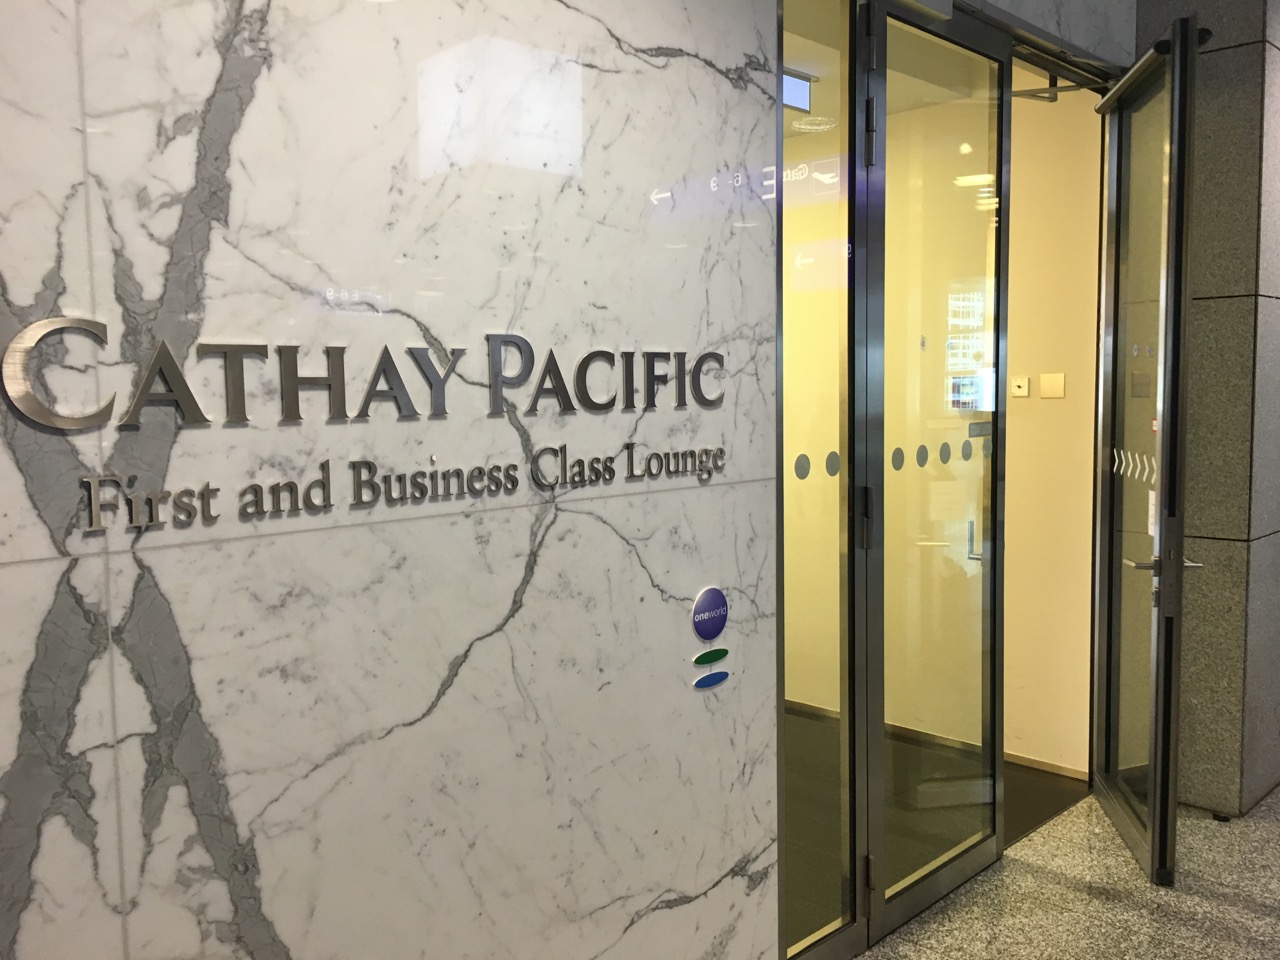 Cathay Pacific First and Business Class Lounge Frankfurt